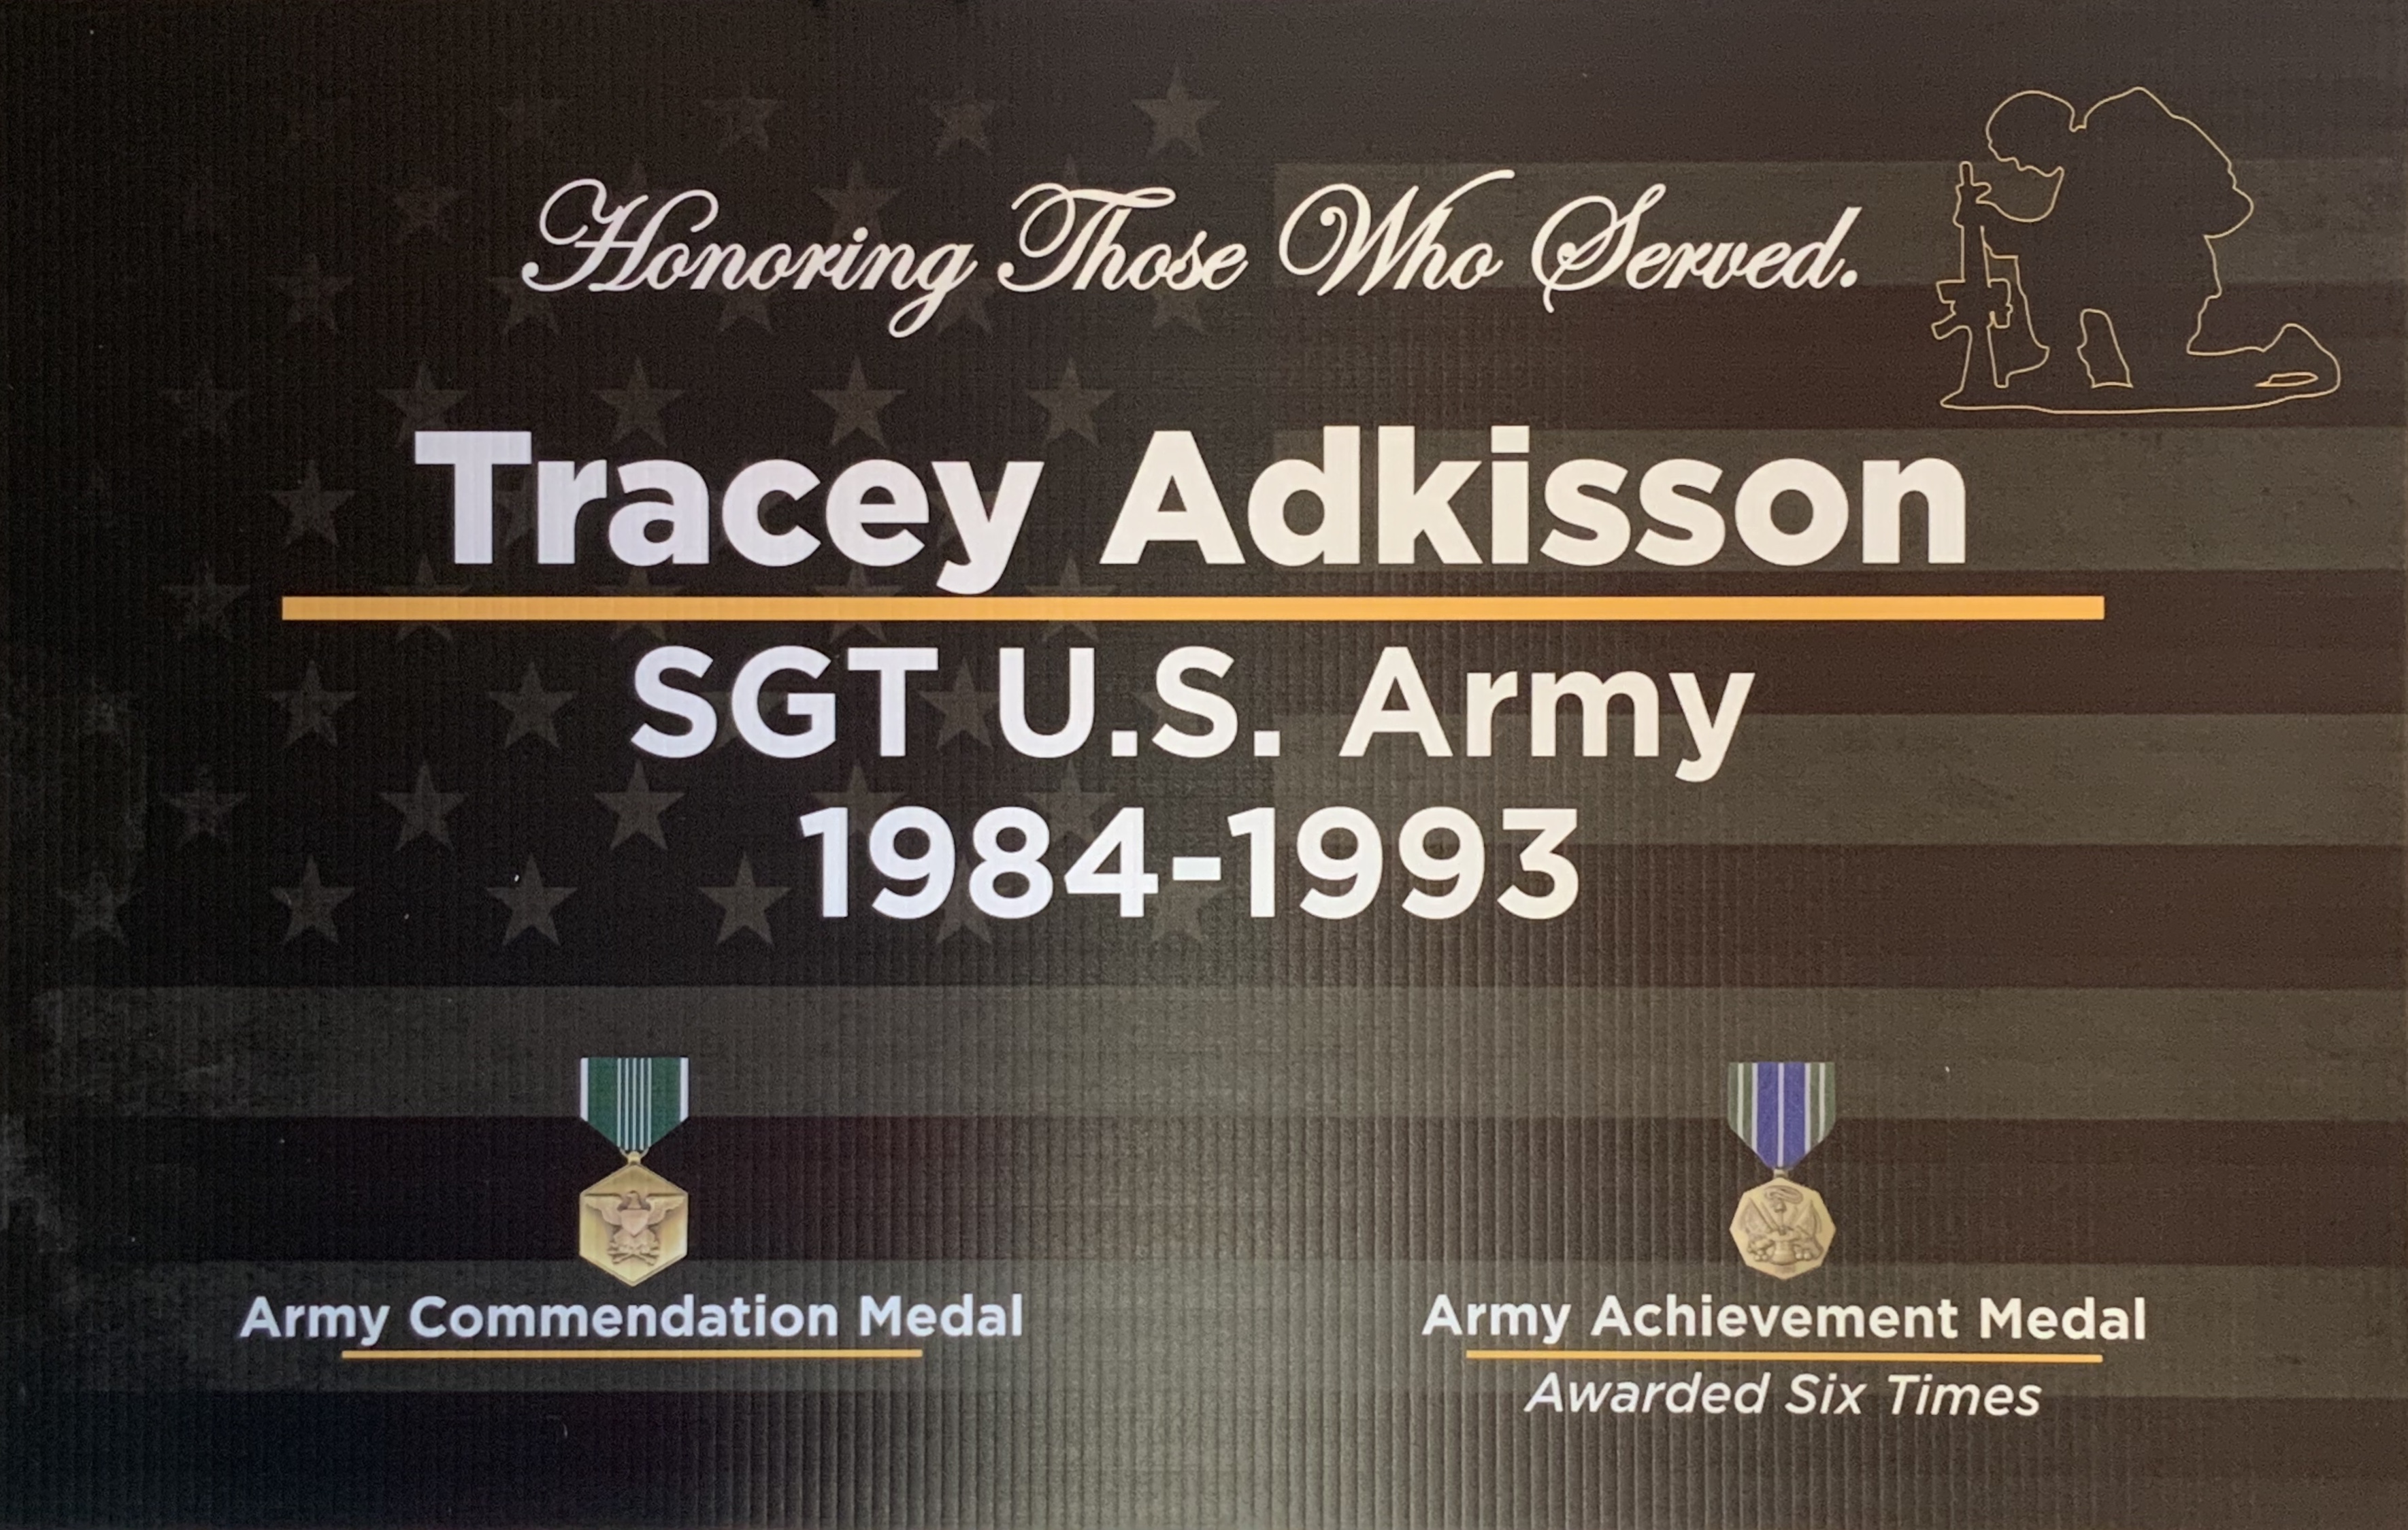 Tracey Adkisson